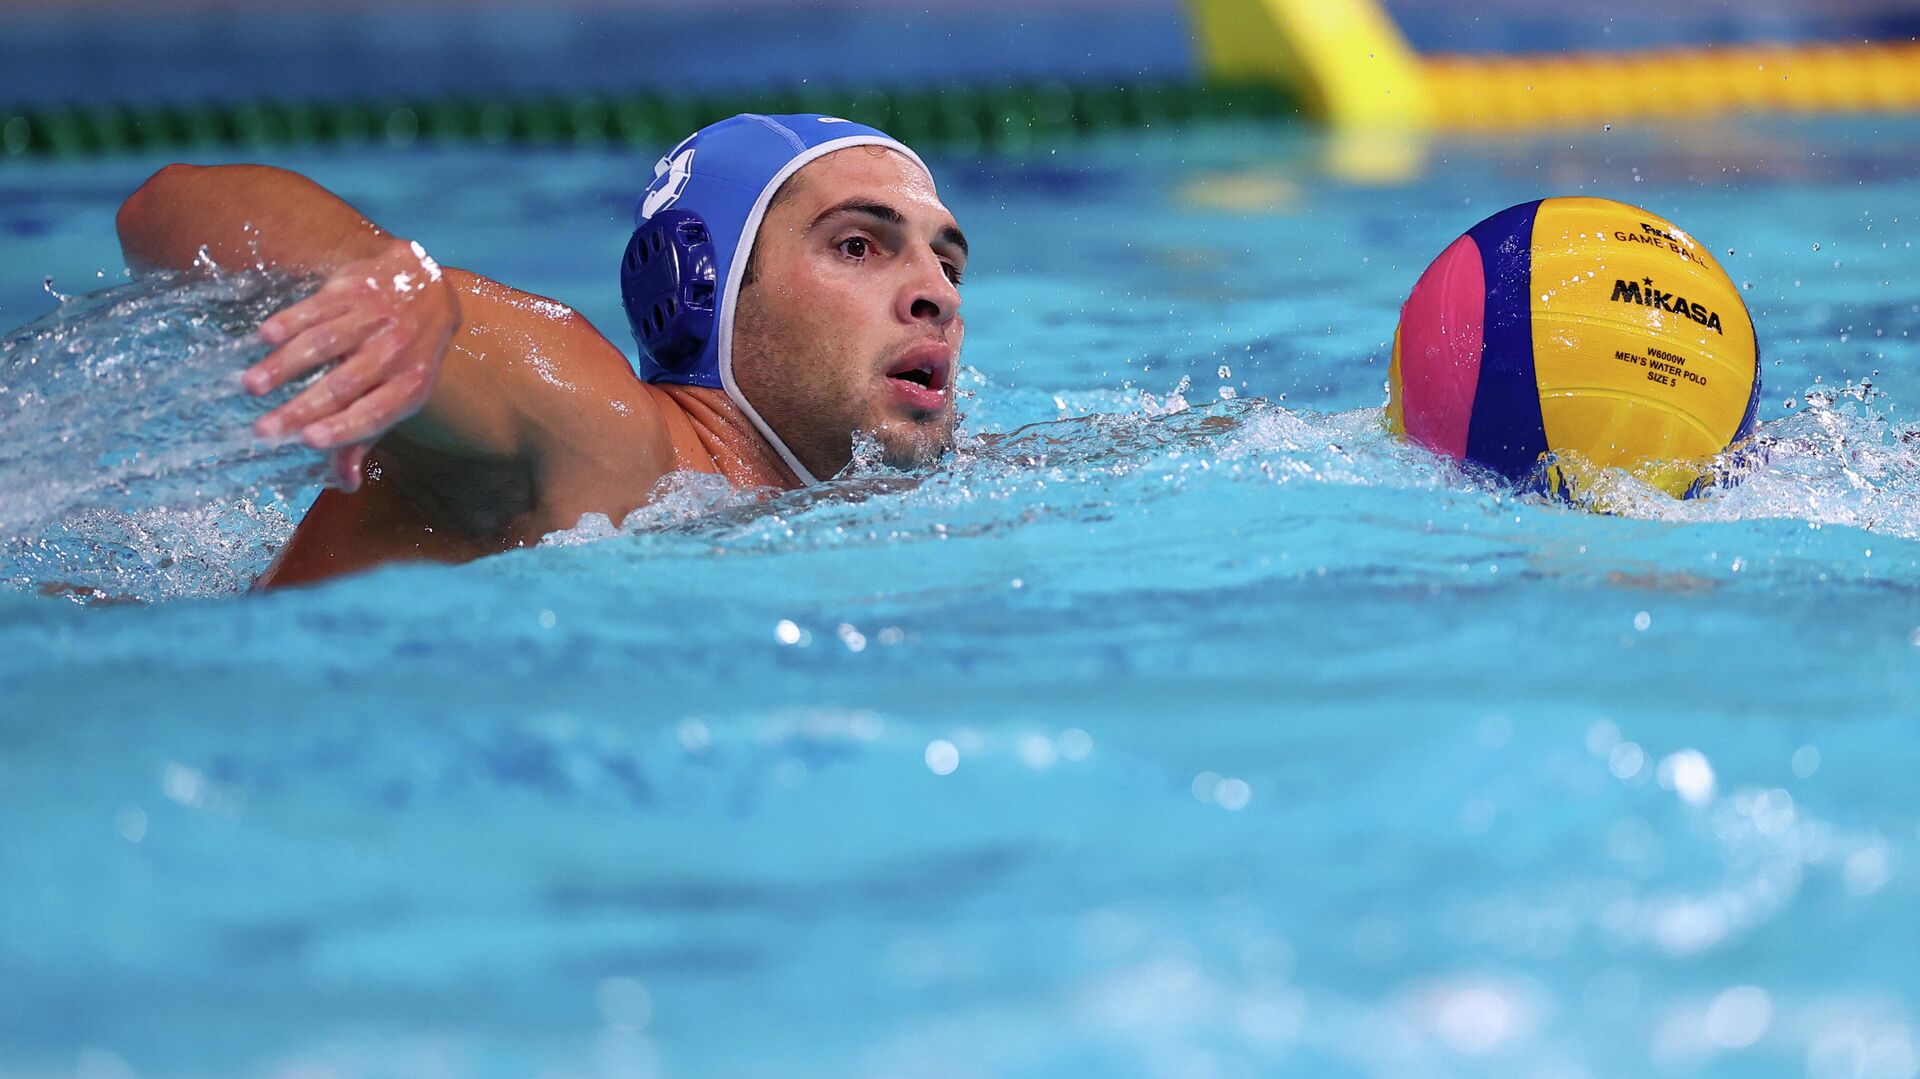 Tokyo 2020 Olympics - Water Polo - Men - Group A - Hungary v Greece - Tatsumi Water Polo Centre, Tokyo, Japan - July 25, 2021. Ioannis Fountoulis of Greece in action. REUTERS/Kacper Pempel - РИА Новости, 1920, 08.08.2021